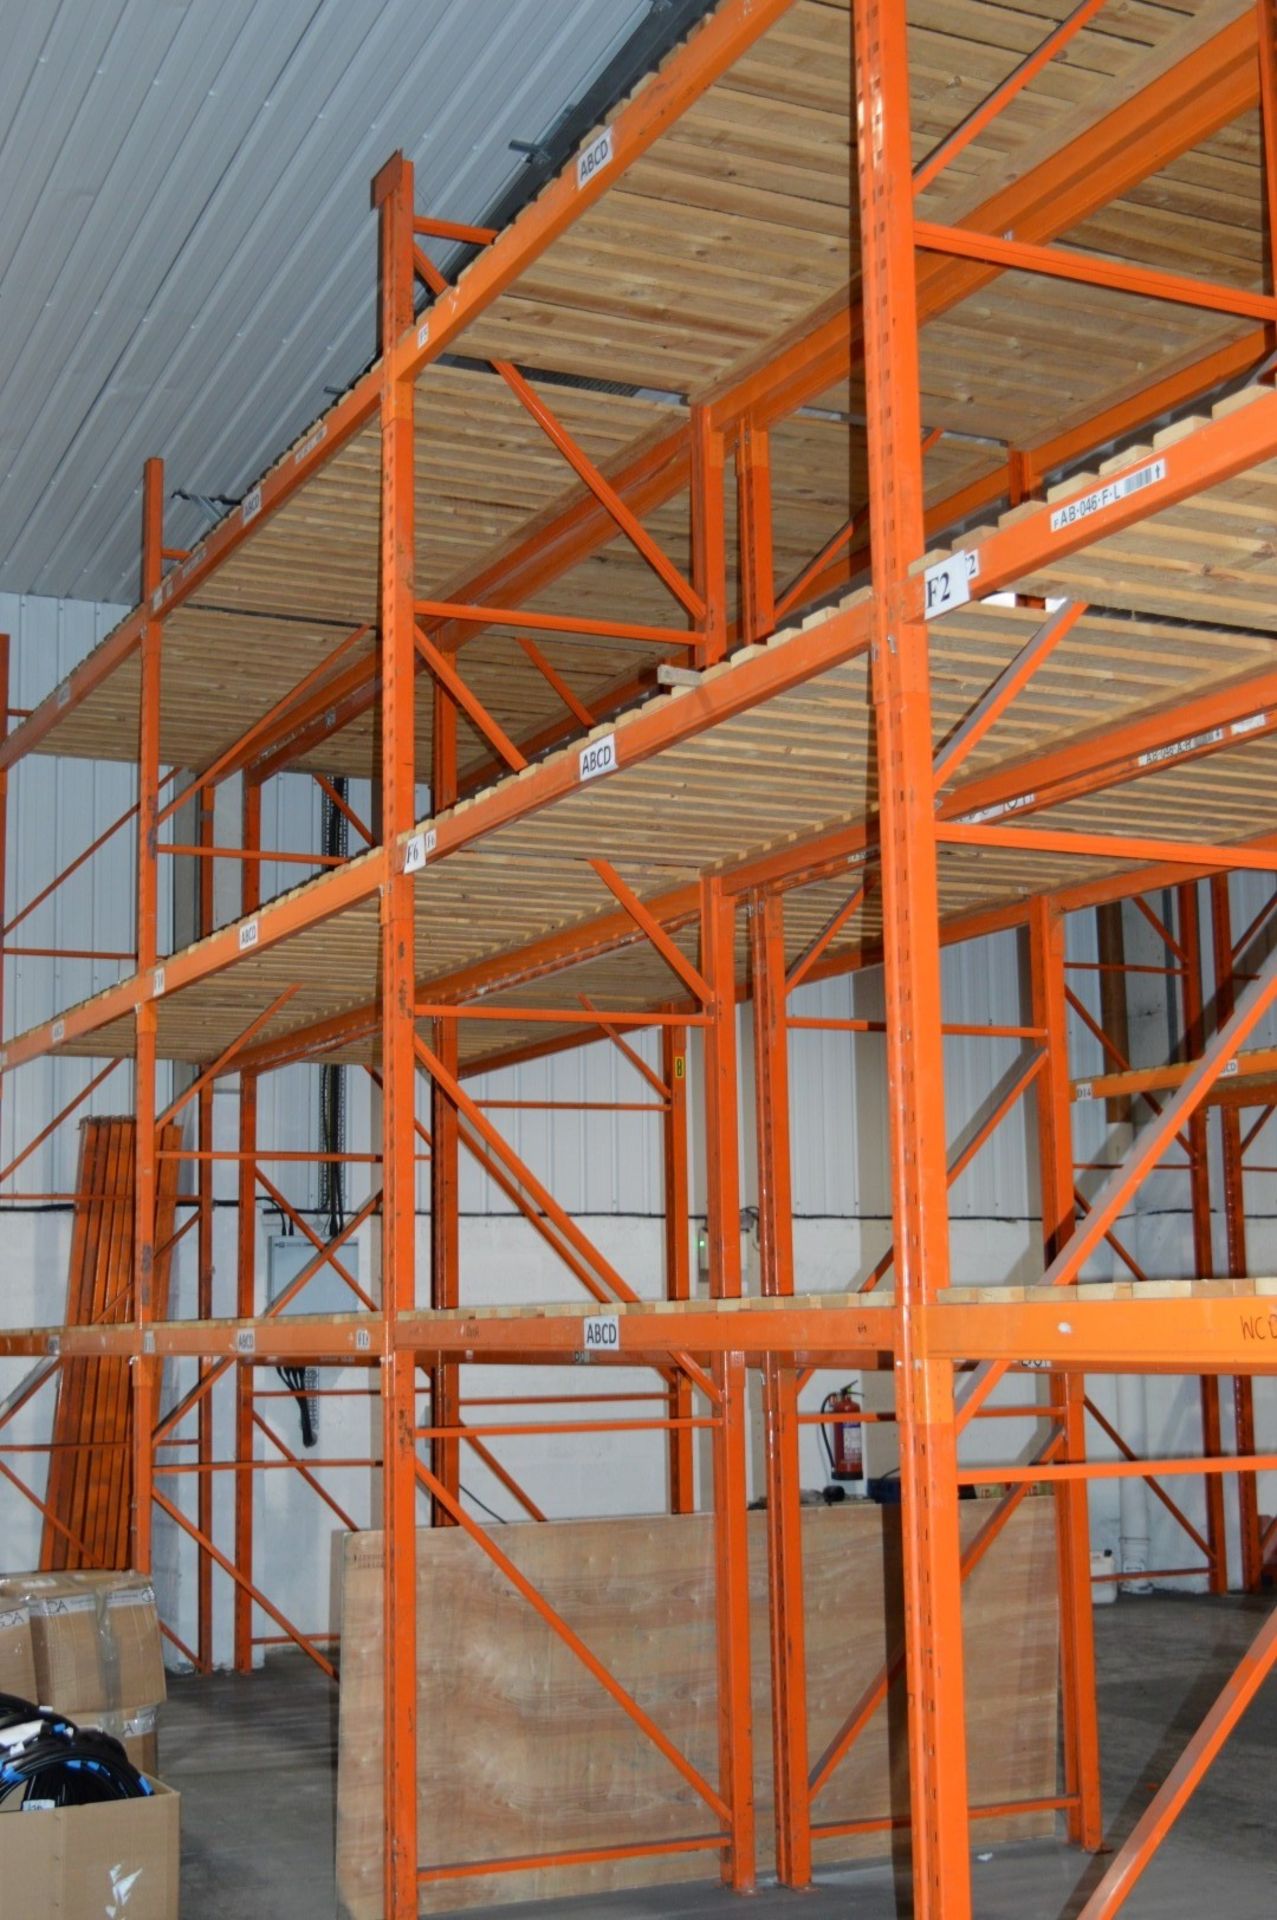 8 x Bays of Warehouse PALLET RACKING - Lot Includes 110 x Uprights, 56 x Crossbeams, 1 x - Image 5 of 9